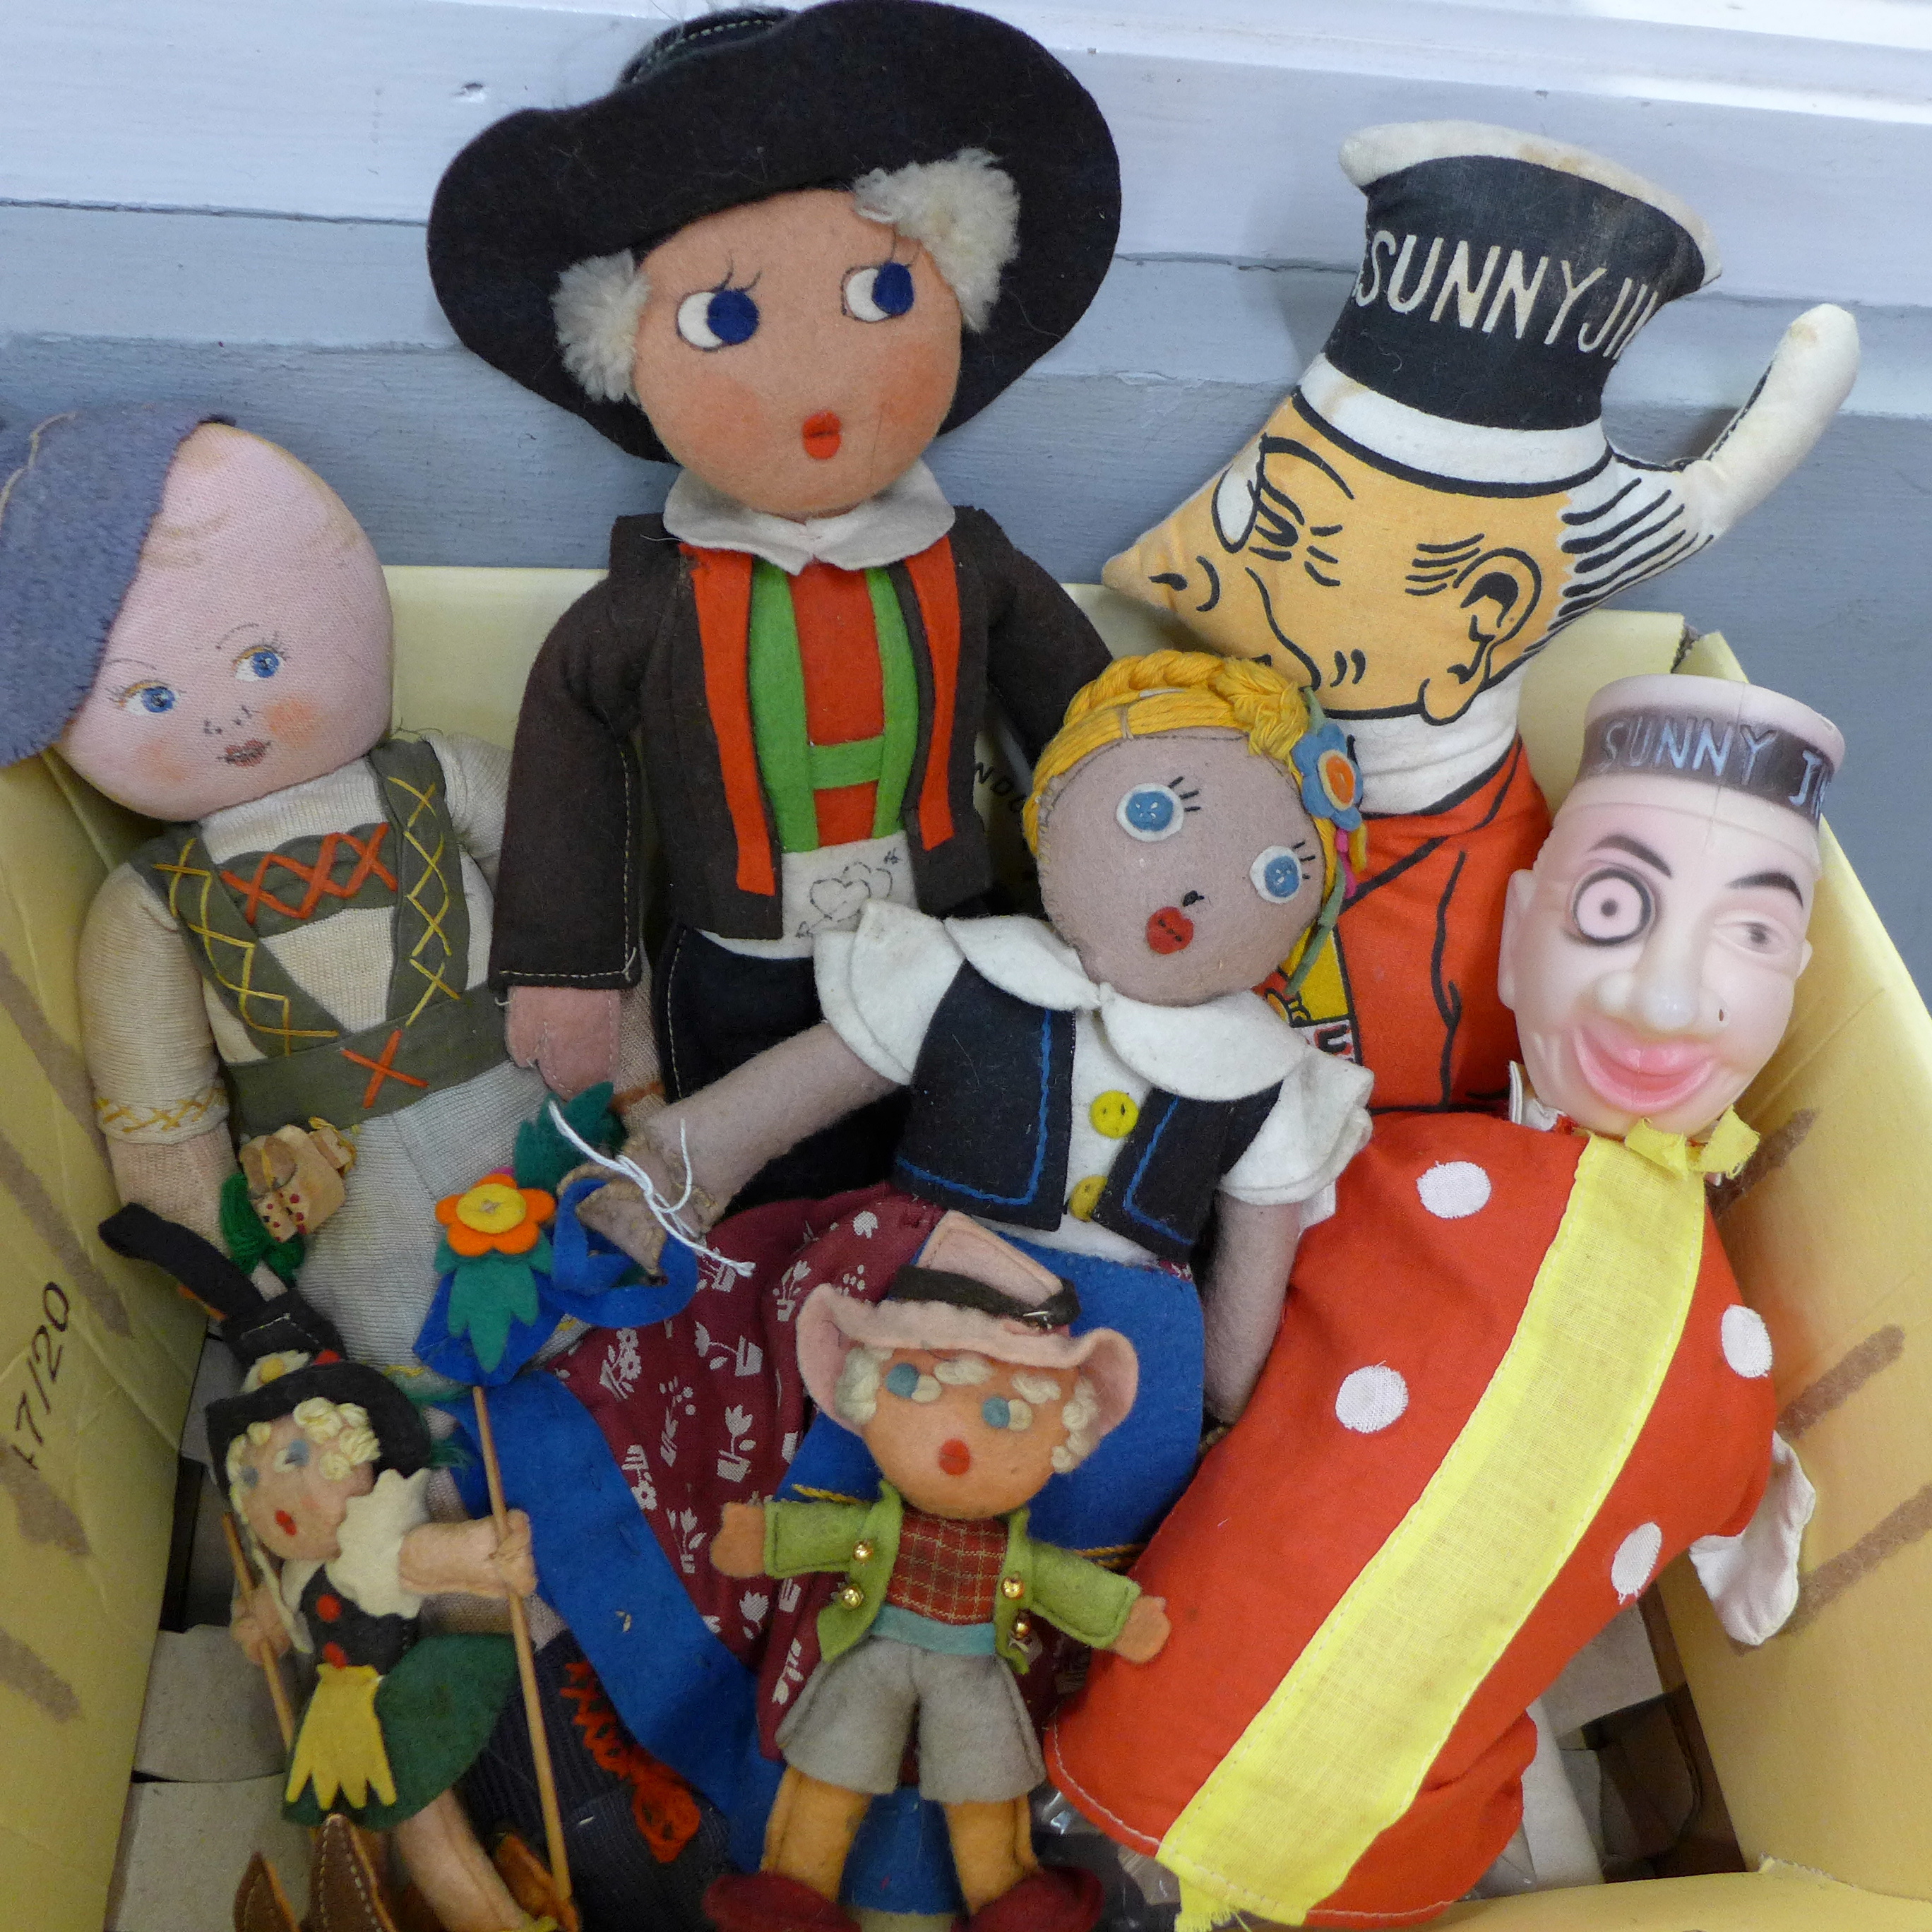 A Sunny Jim soft toy glove puppet and Scandinavian toys